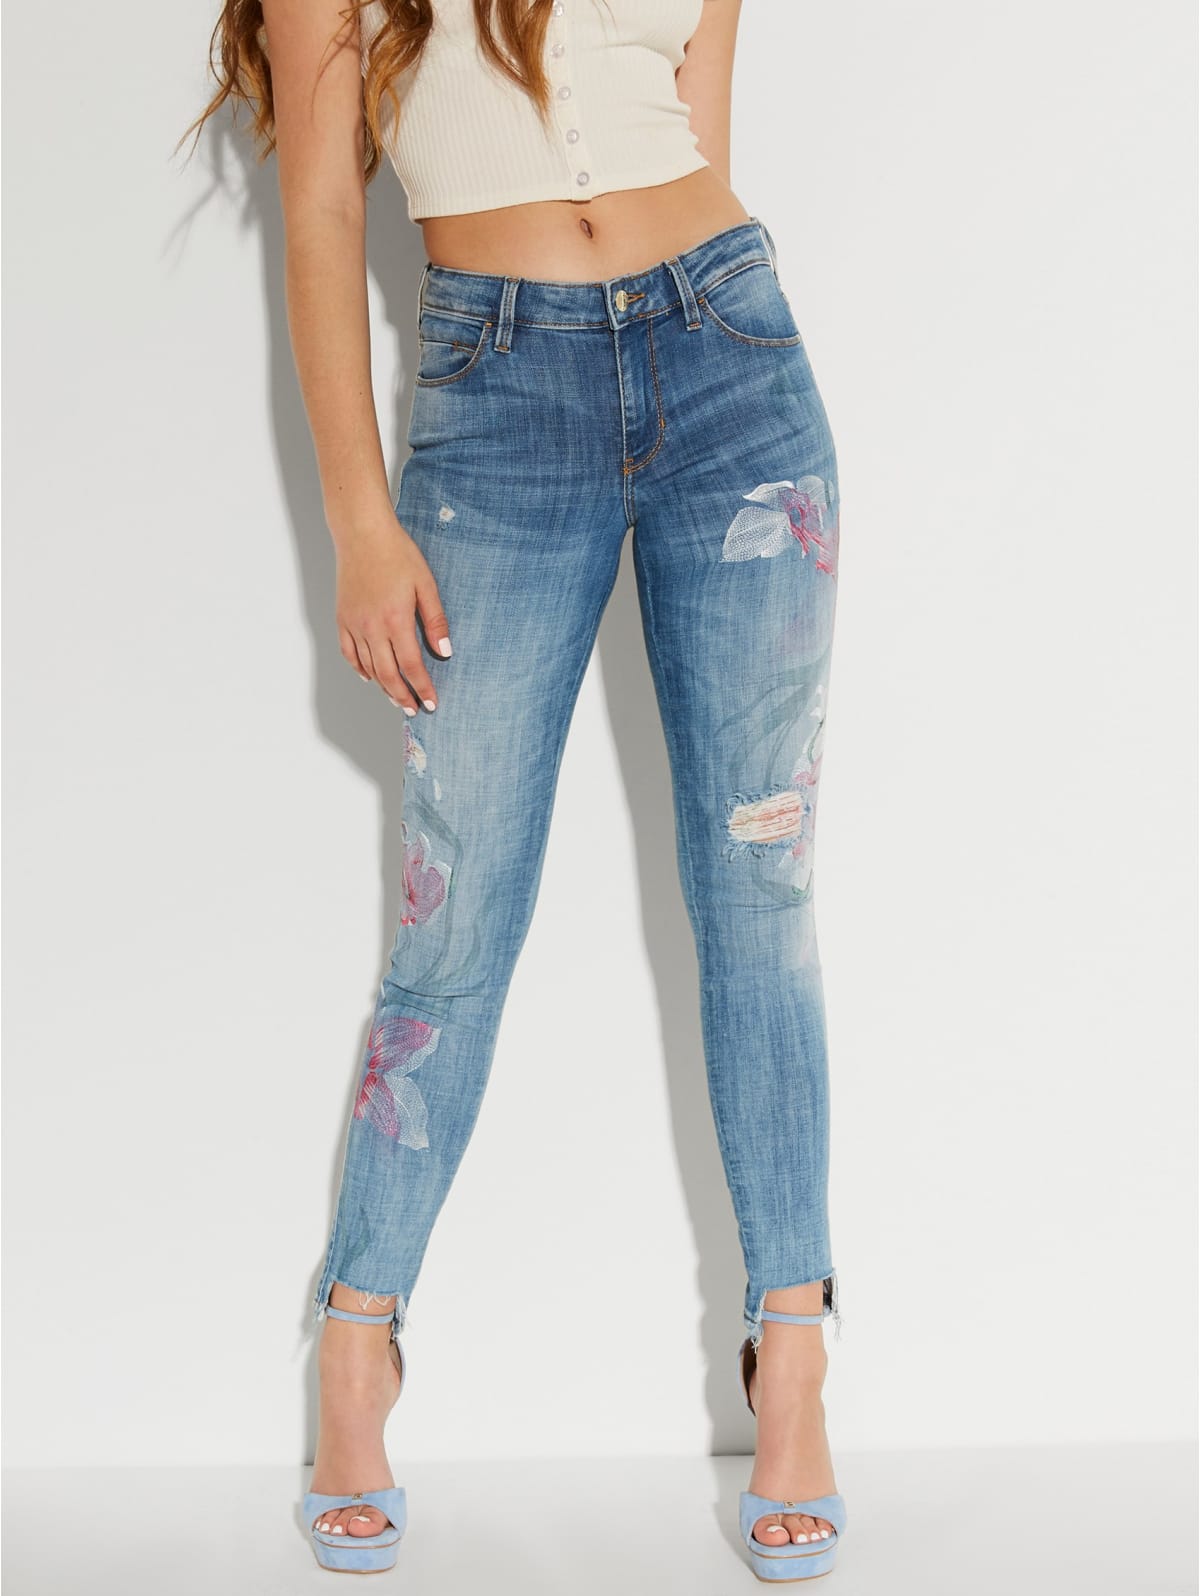 destroyed jean shorts womens